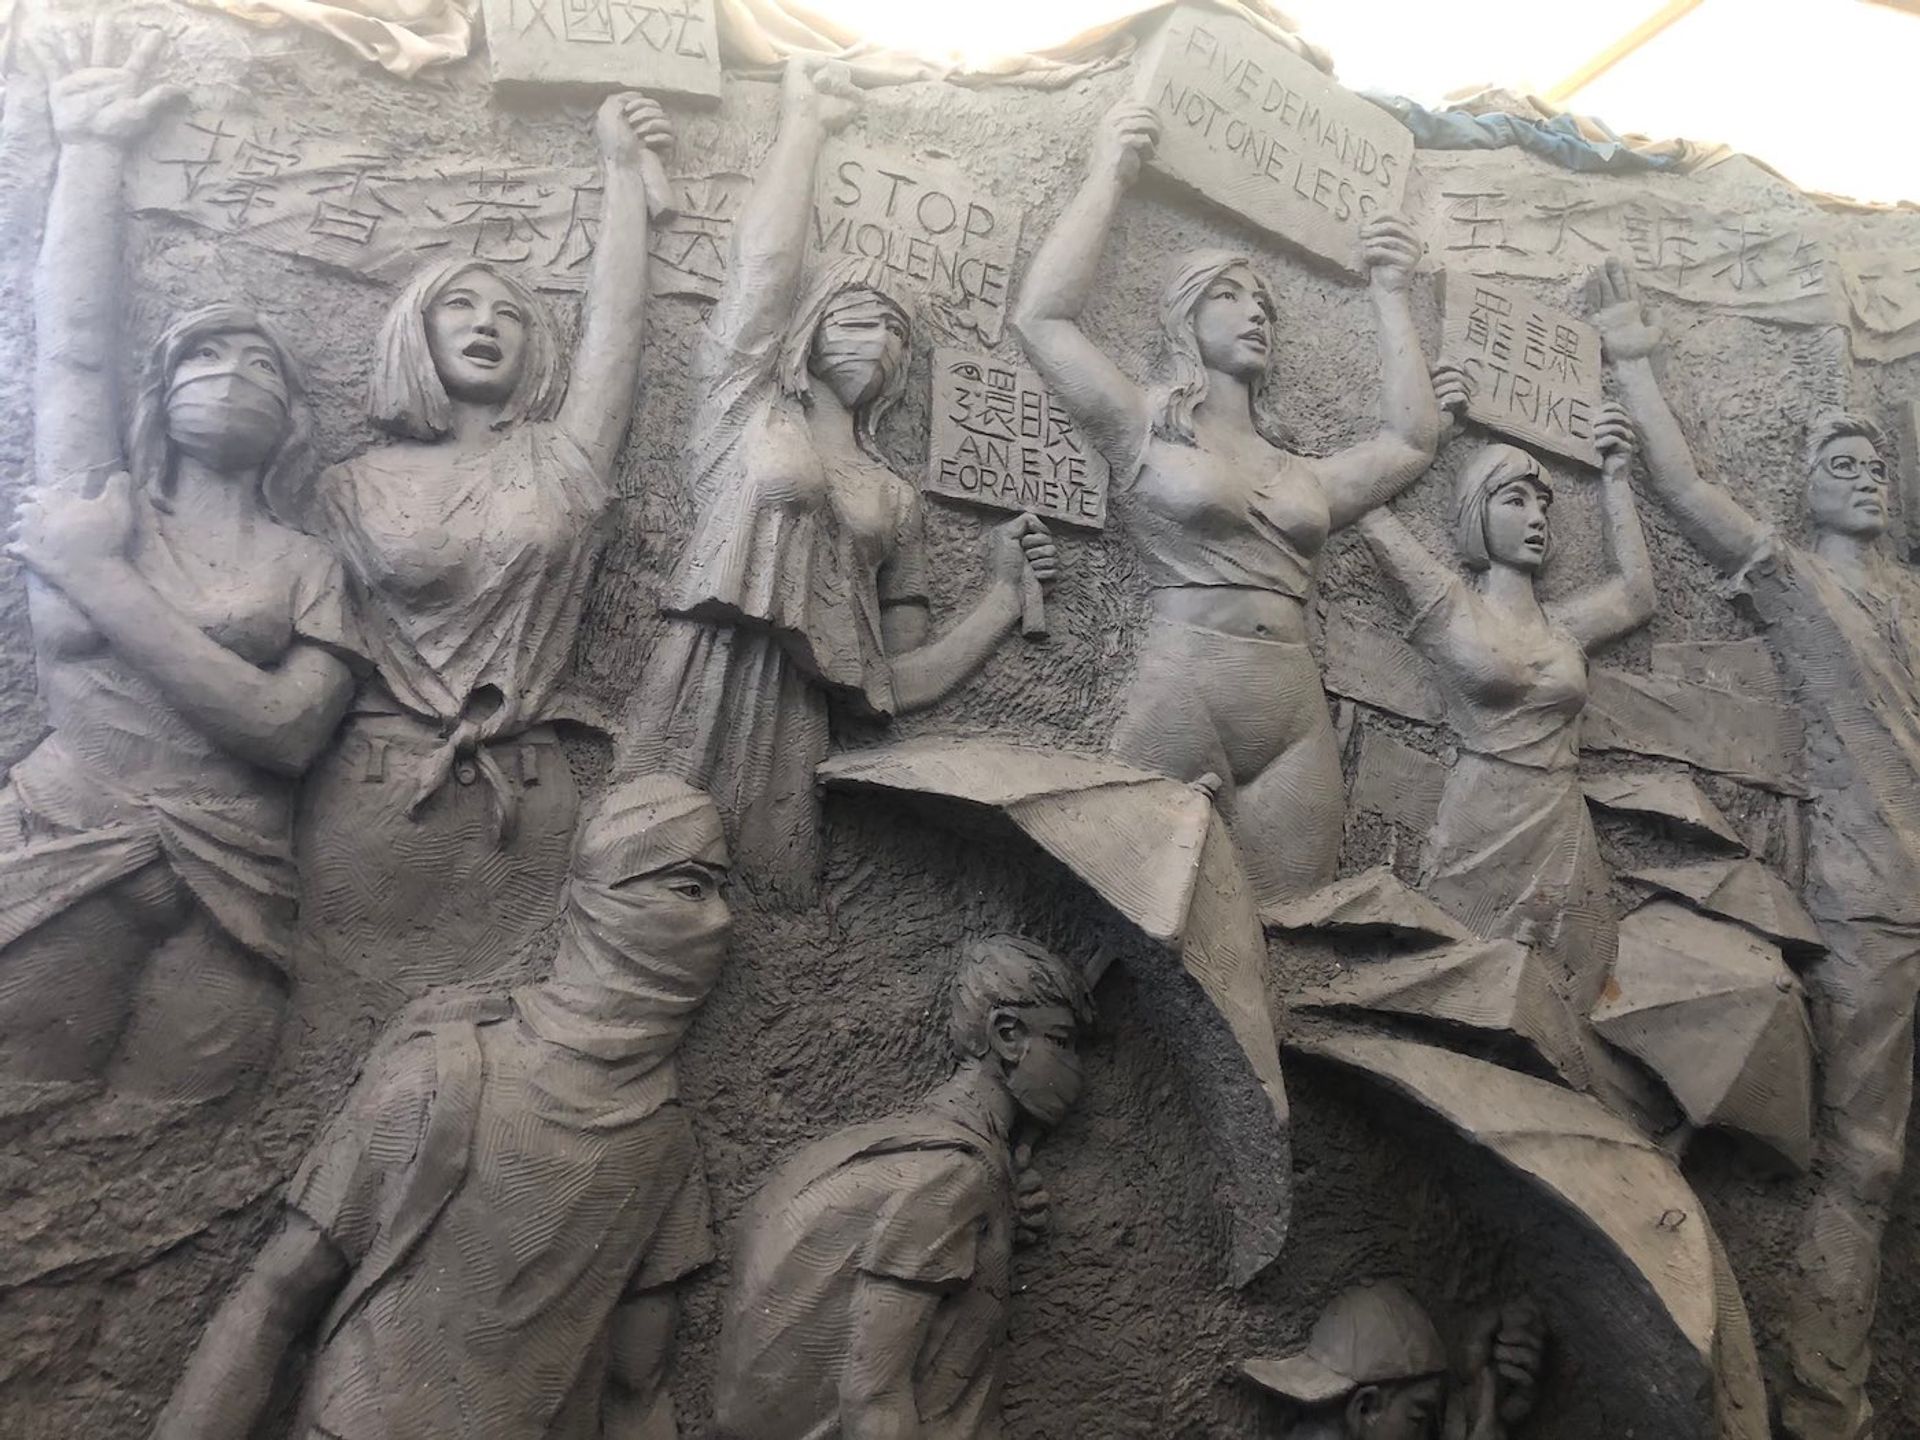 The sculpture will depict scenes including the now iconic umbrellas used in the protests Chen Weiming